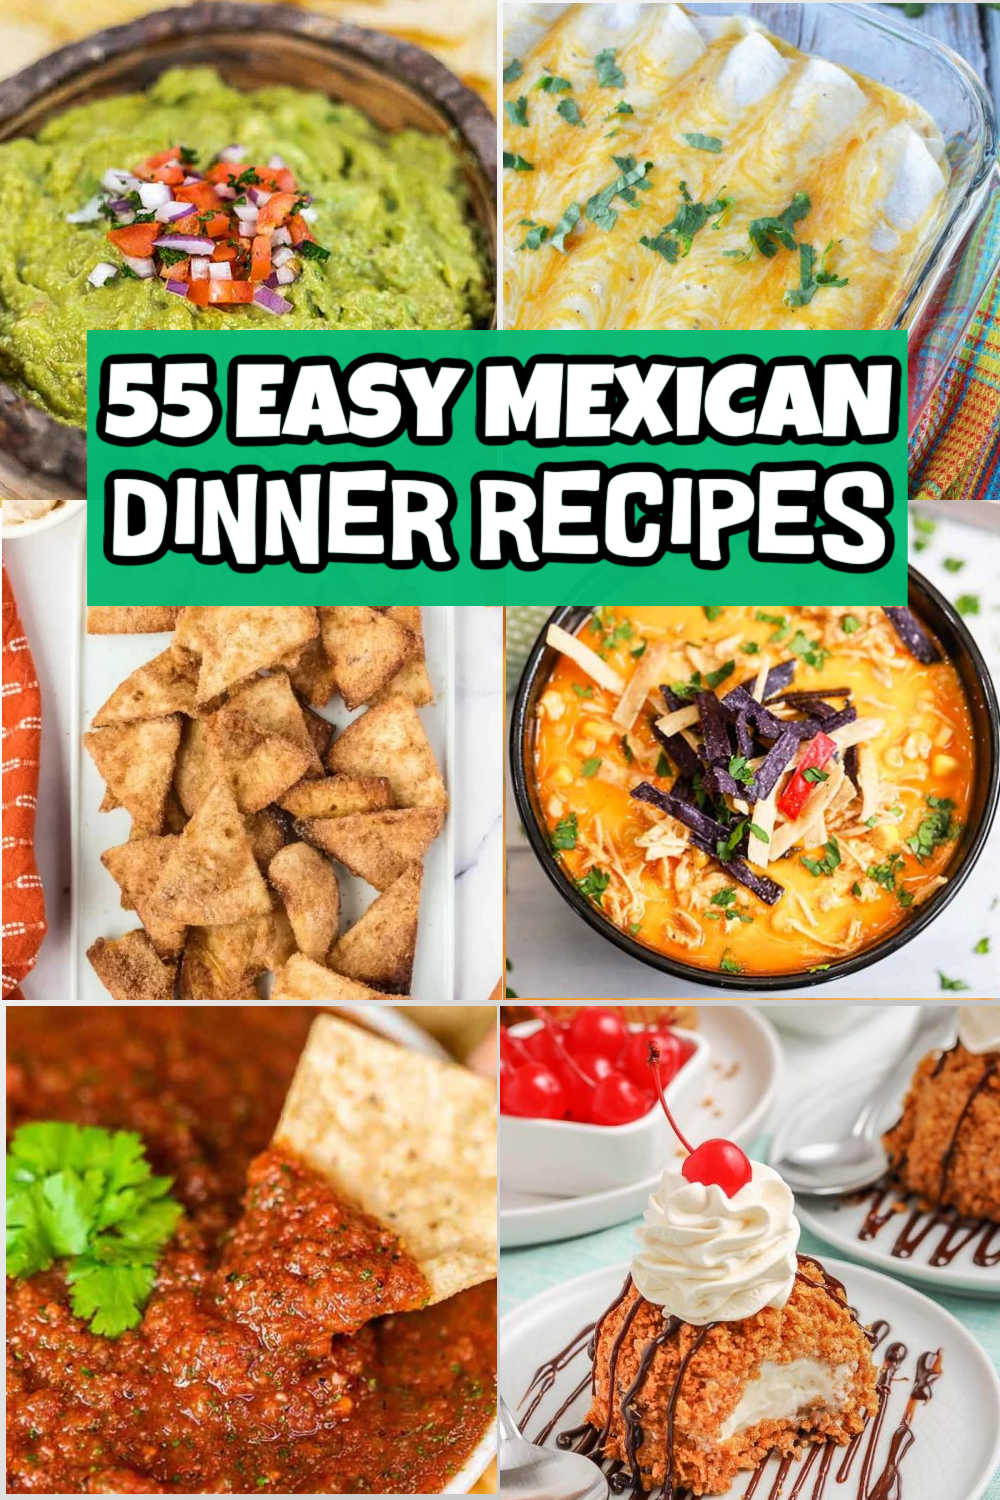 Easy and delicious Mexican Dinner Recipes that are crowd pleasing for a simple weeknight meal. 55 of our favorite Mexican Recipes. Mexican dishes are my favorite recipes to make. These Mexican recipes for dinner are simple to make and made with easy ingredients. From queso dip, slow cooker chicken enchiladas, and ground beef tacos these recipes are quick and easy. #eatingonadime #mexicandinnerrecipes #mexicanfood 